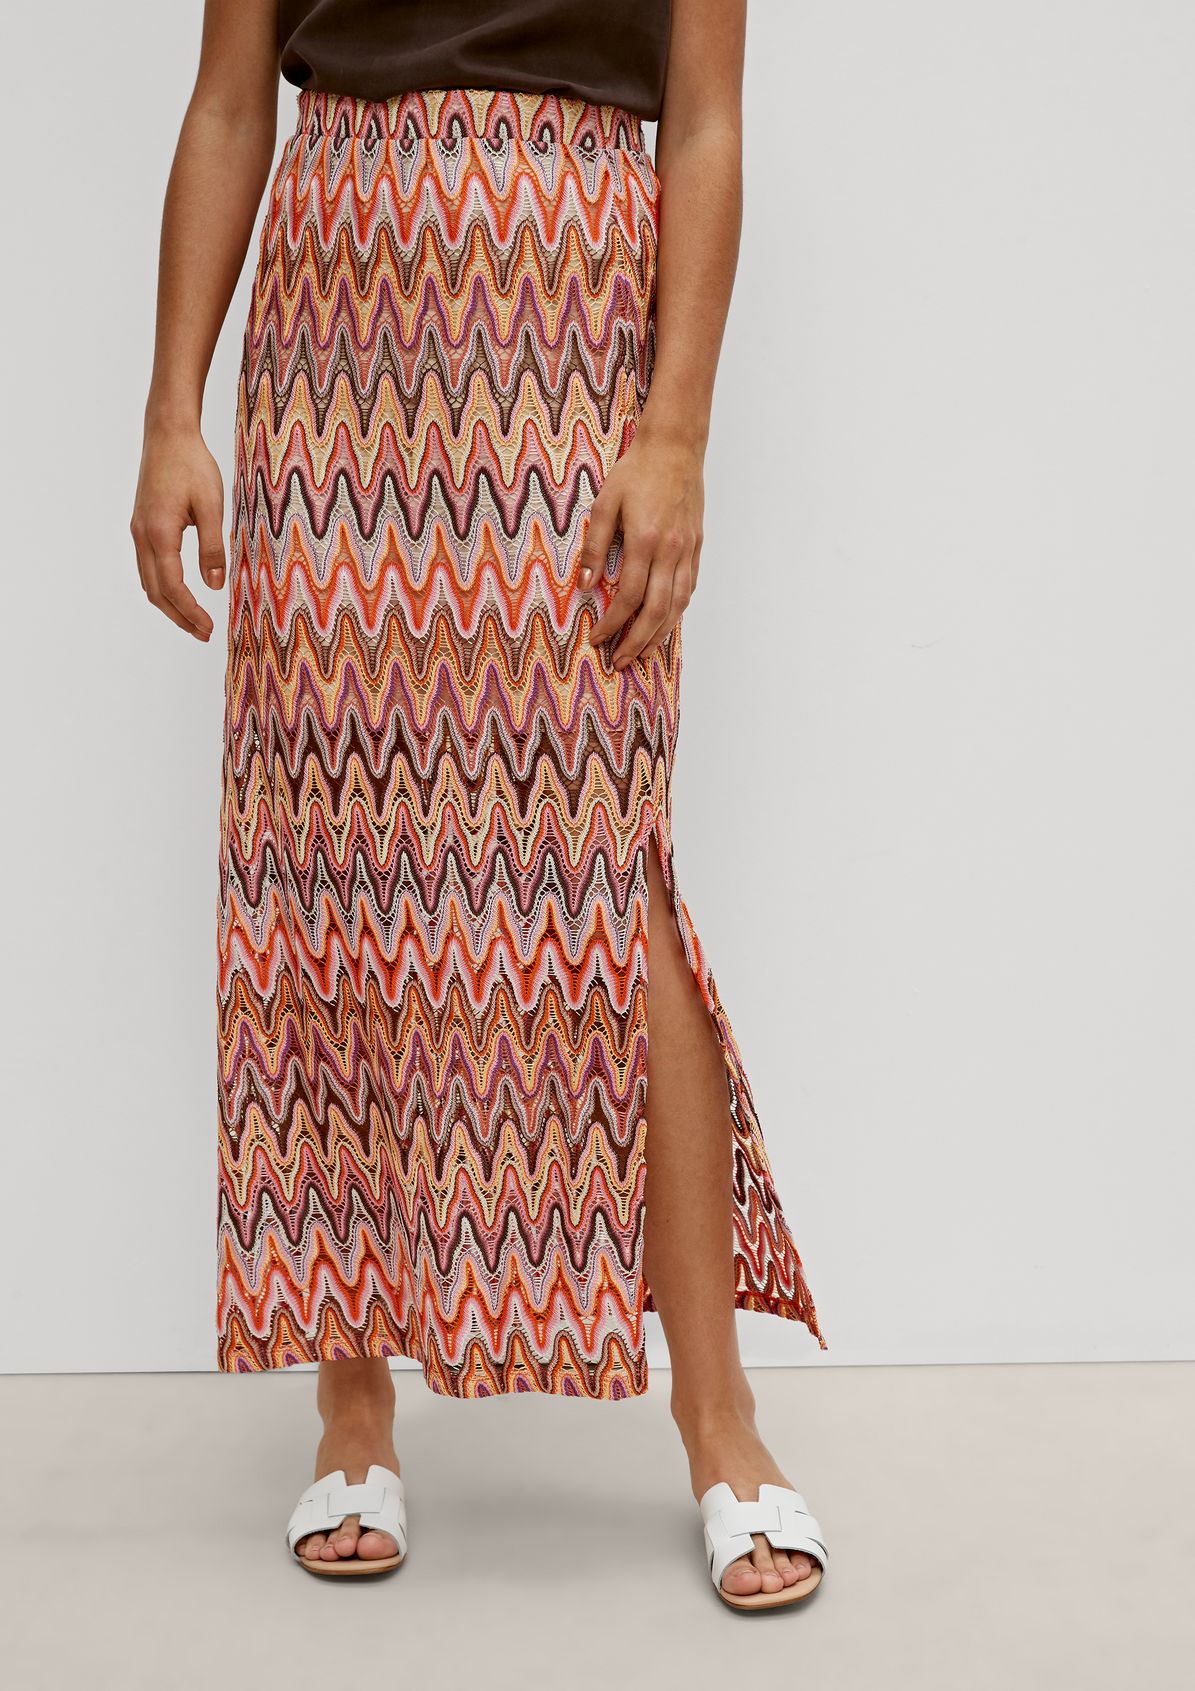 Midi skirt in a colourful crocheted look from comma